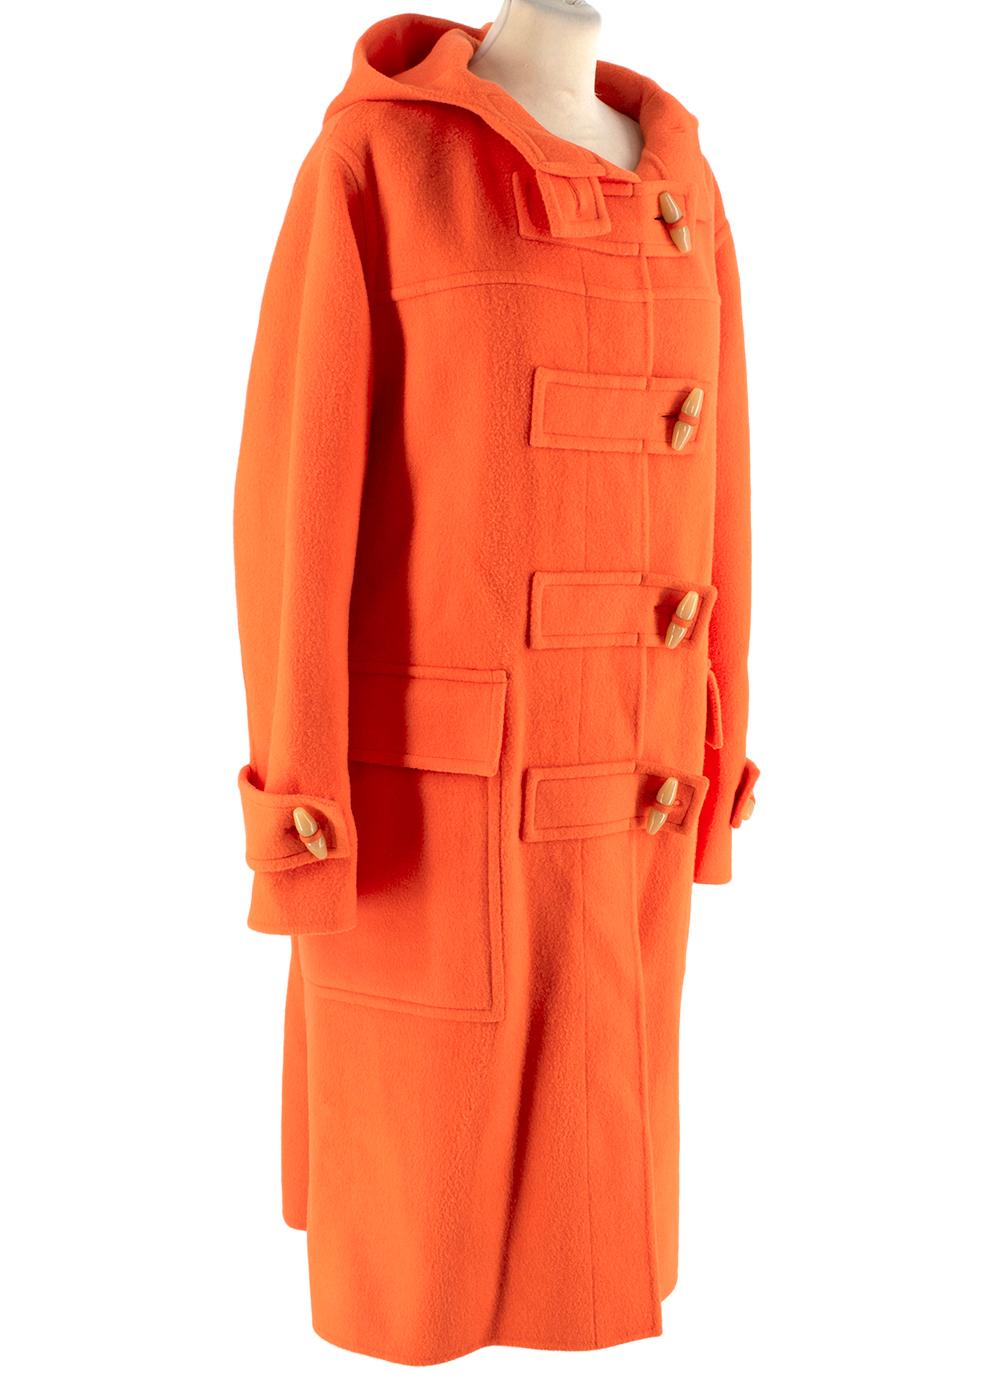 Joseph Orange Maken Wool Duffle Coat 

- Bright orange wool duffle coat featuring a hood and toggle closure at front with tabs and toggle accents at cuffs
- Front flap pockets 
- Rear sewn in belt with toggles
- Partially lined 
- Perfect for the